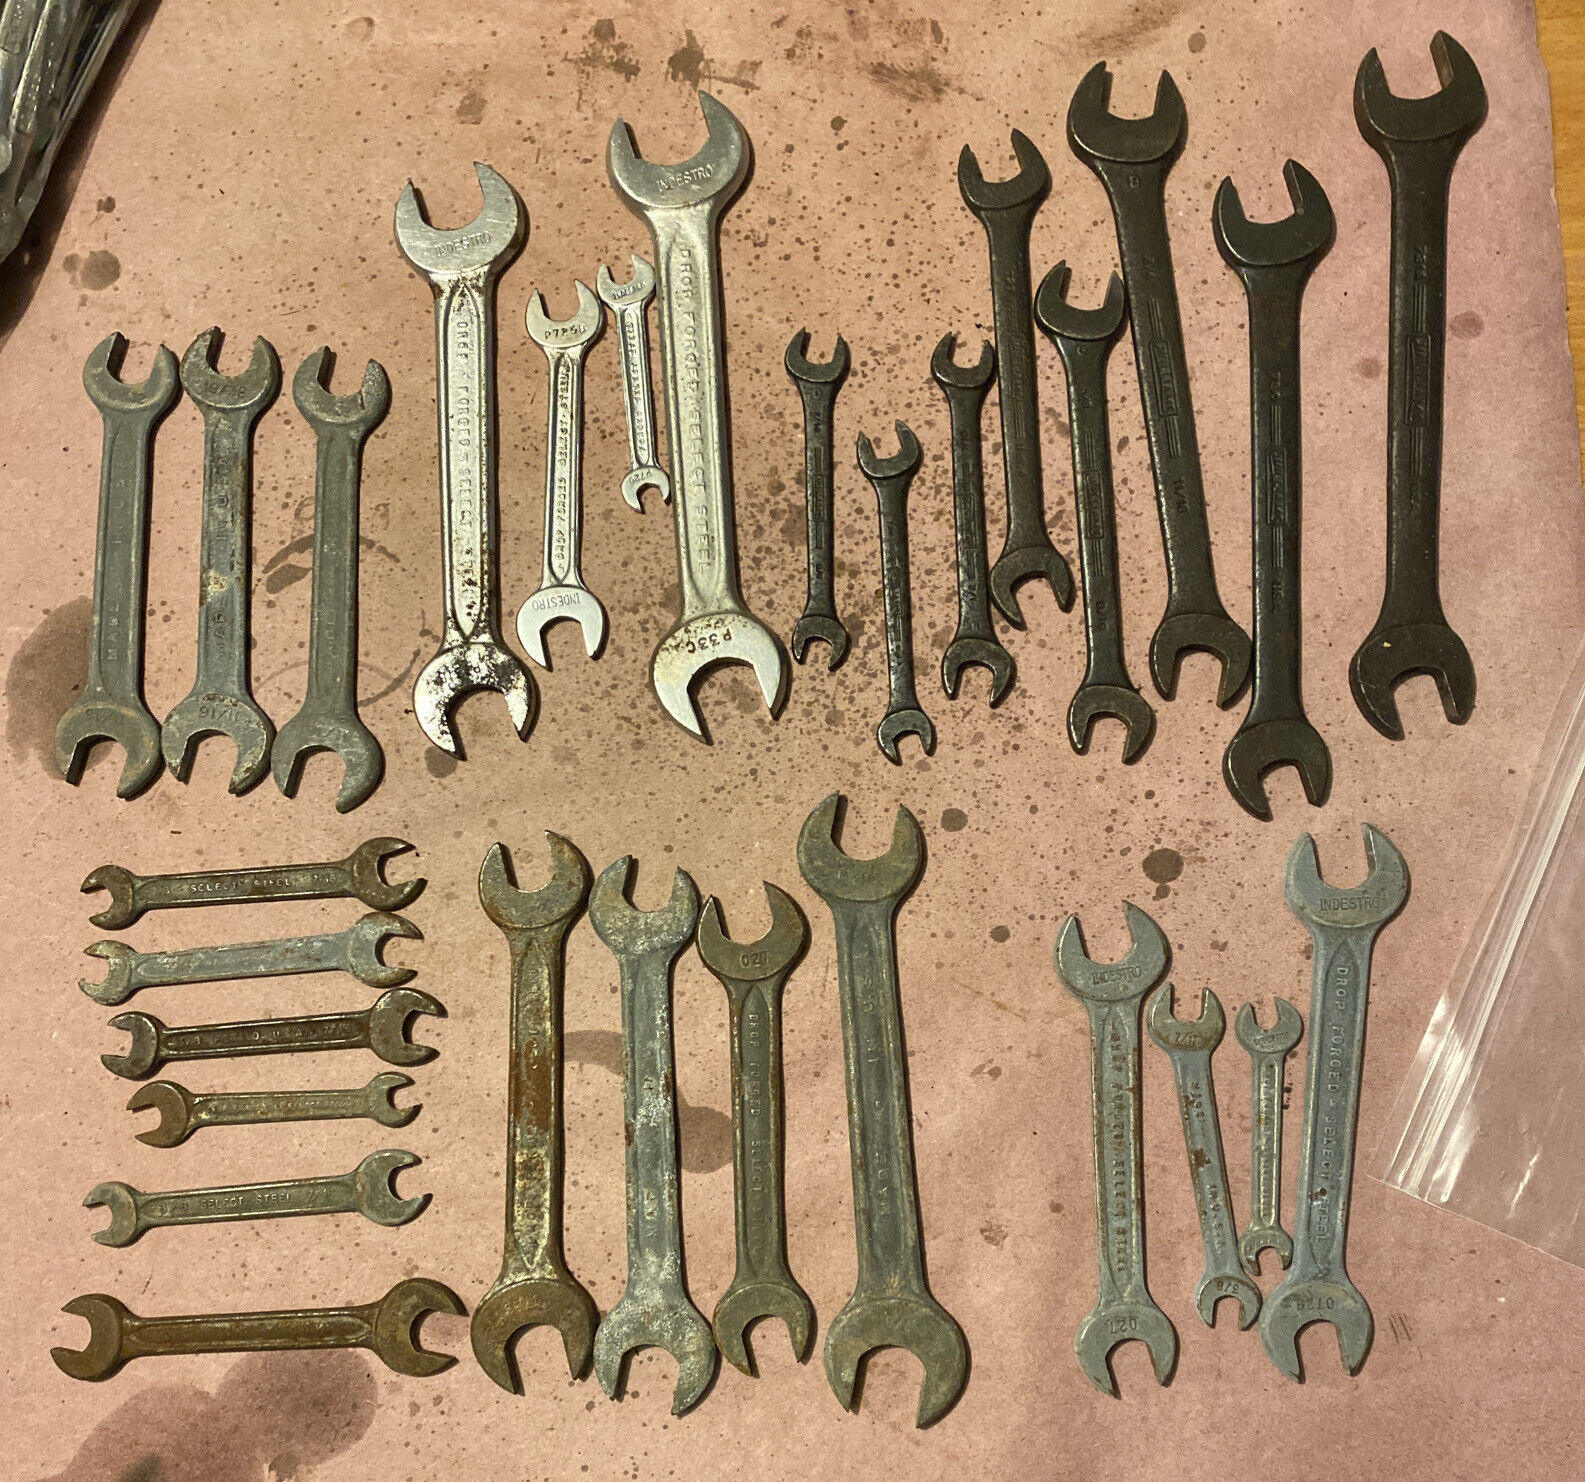 Lot of 28 Vintage Wrenches Various Sizes, Williams, Indestro, Unbranded